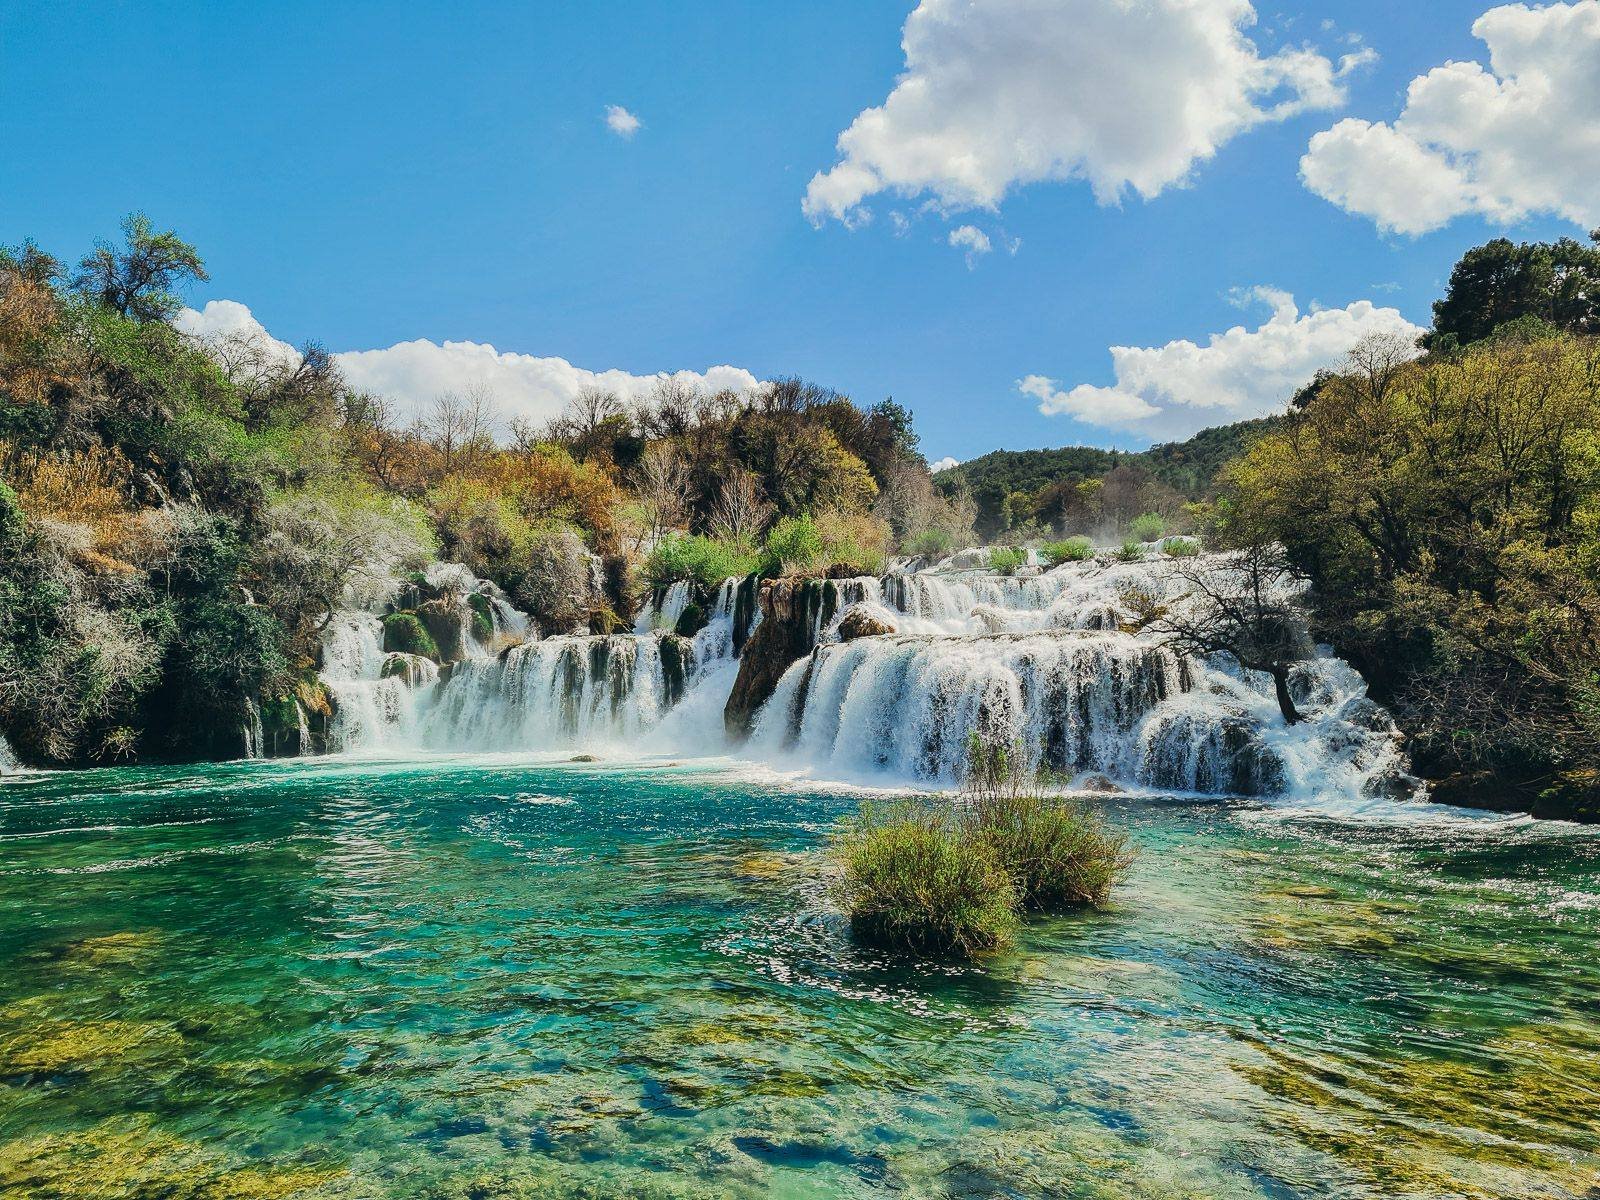 A series of waterfalls flowing white into an emerald green pool. Greenery surrounds the falls and river pool at Krka waterfalls